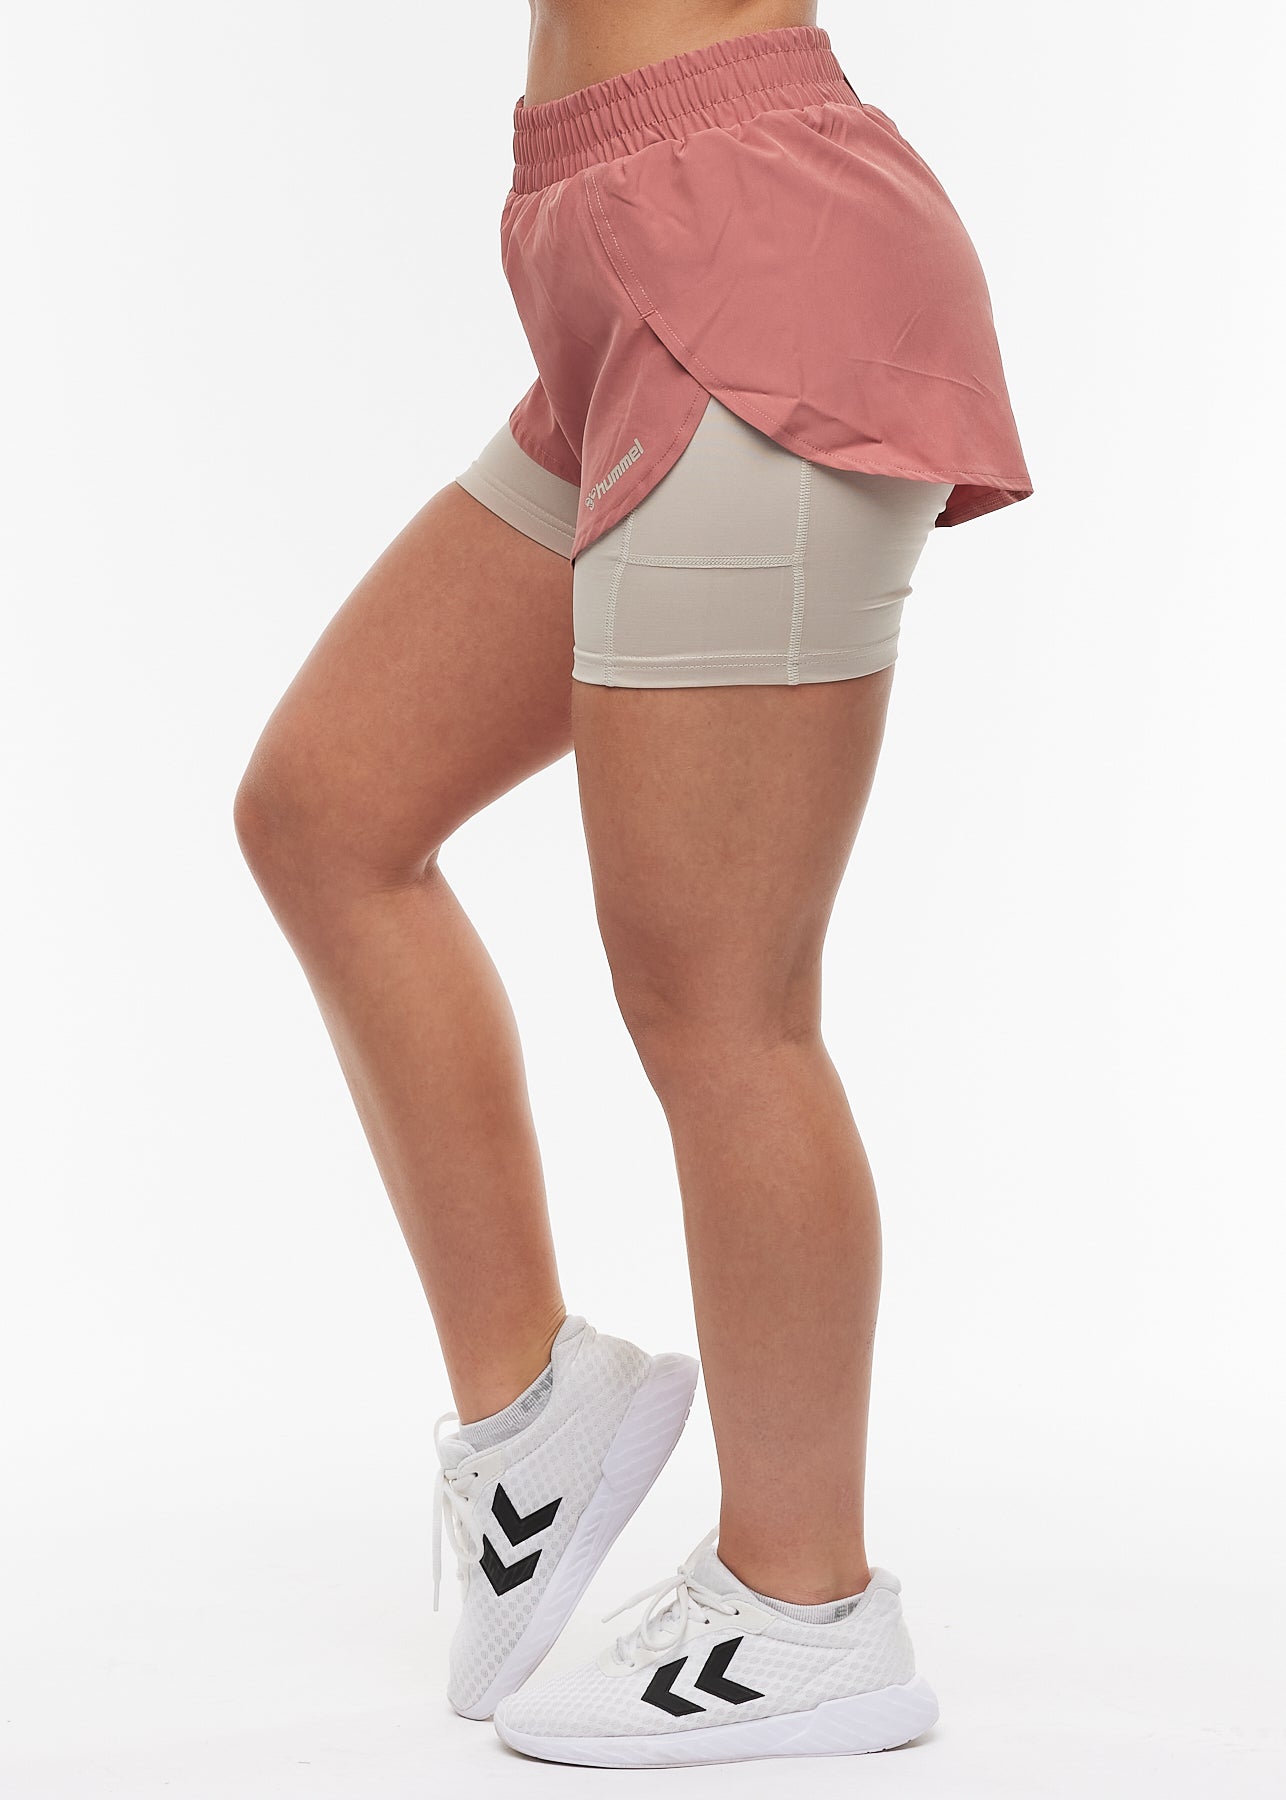 #3 - HUMMEL - TRACK 2 IN 1 SHORTS WITHERED ROSE - XS